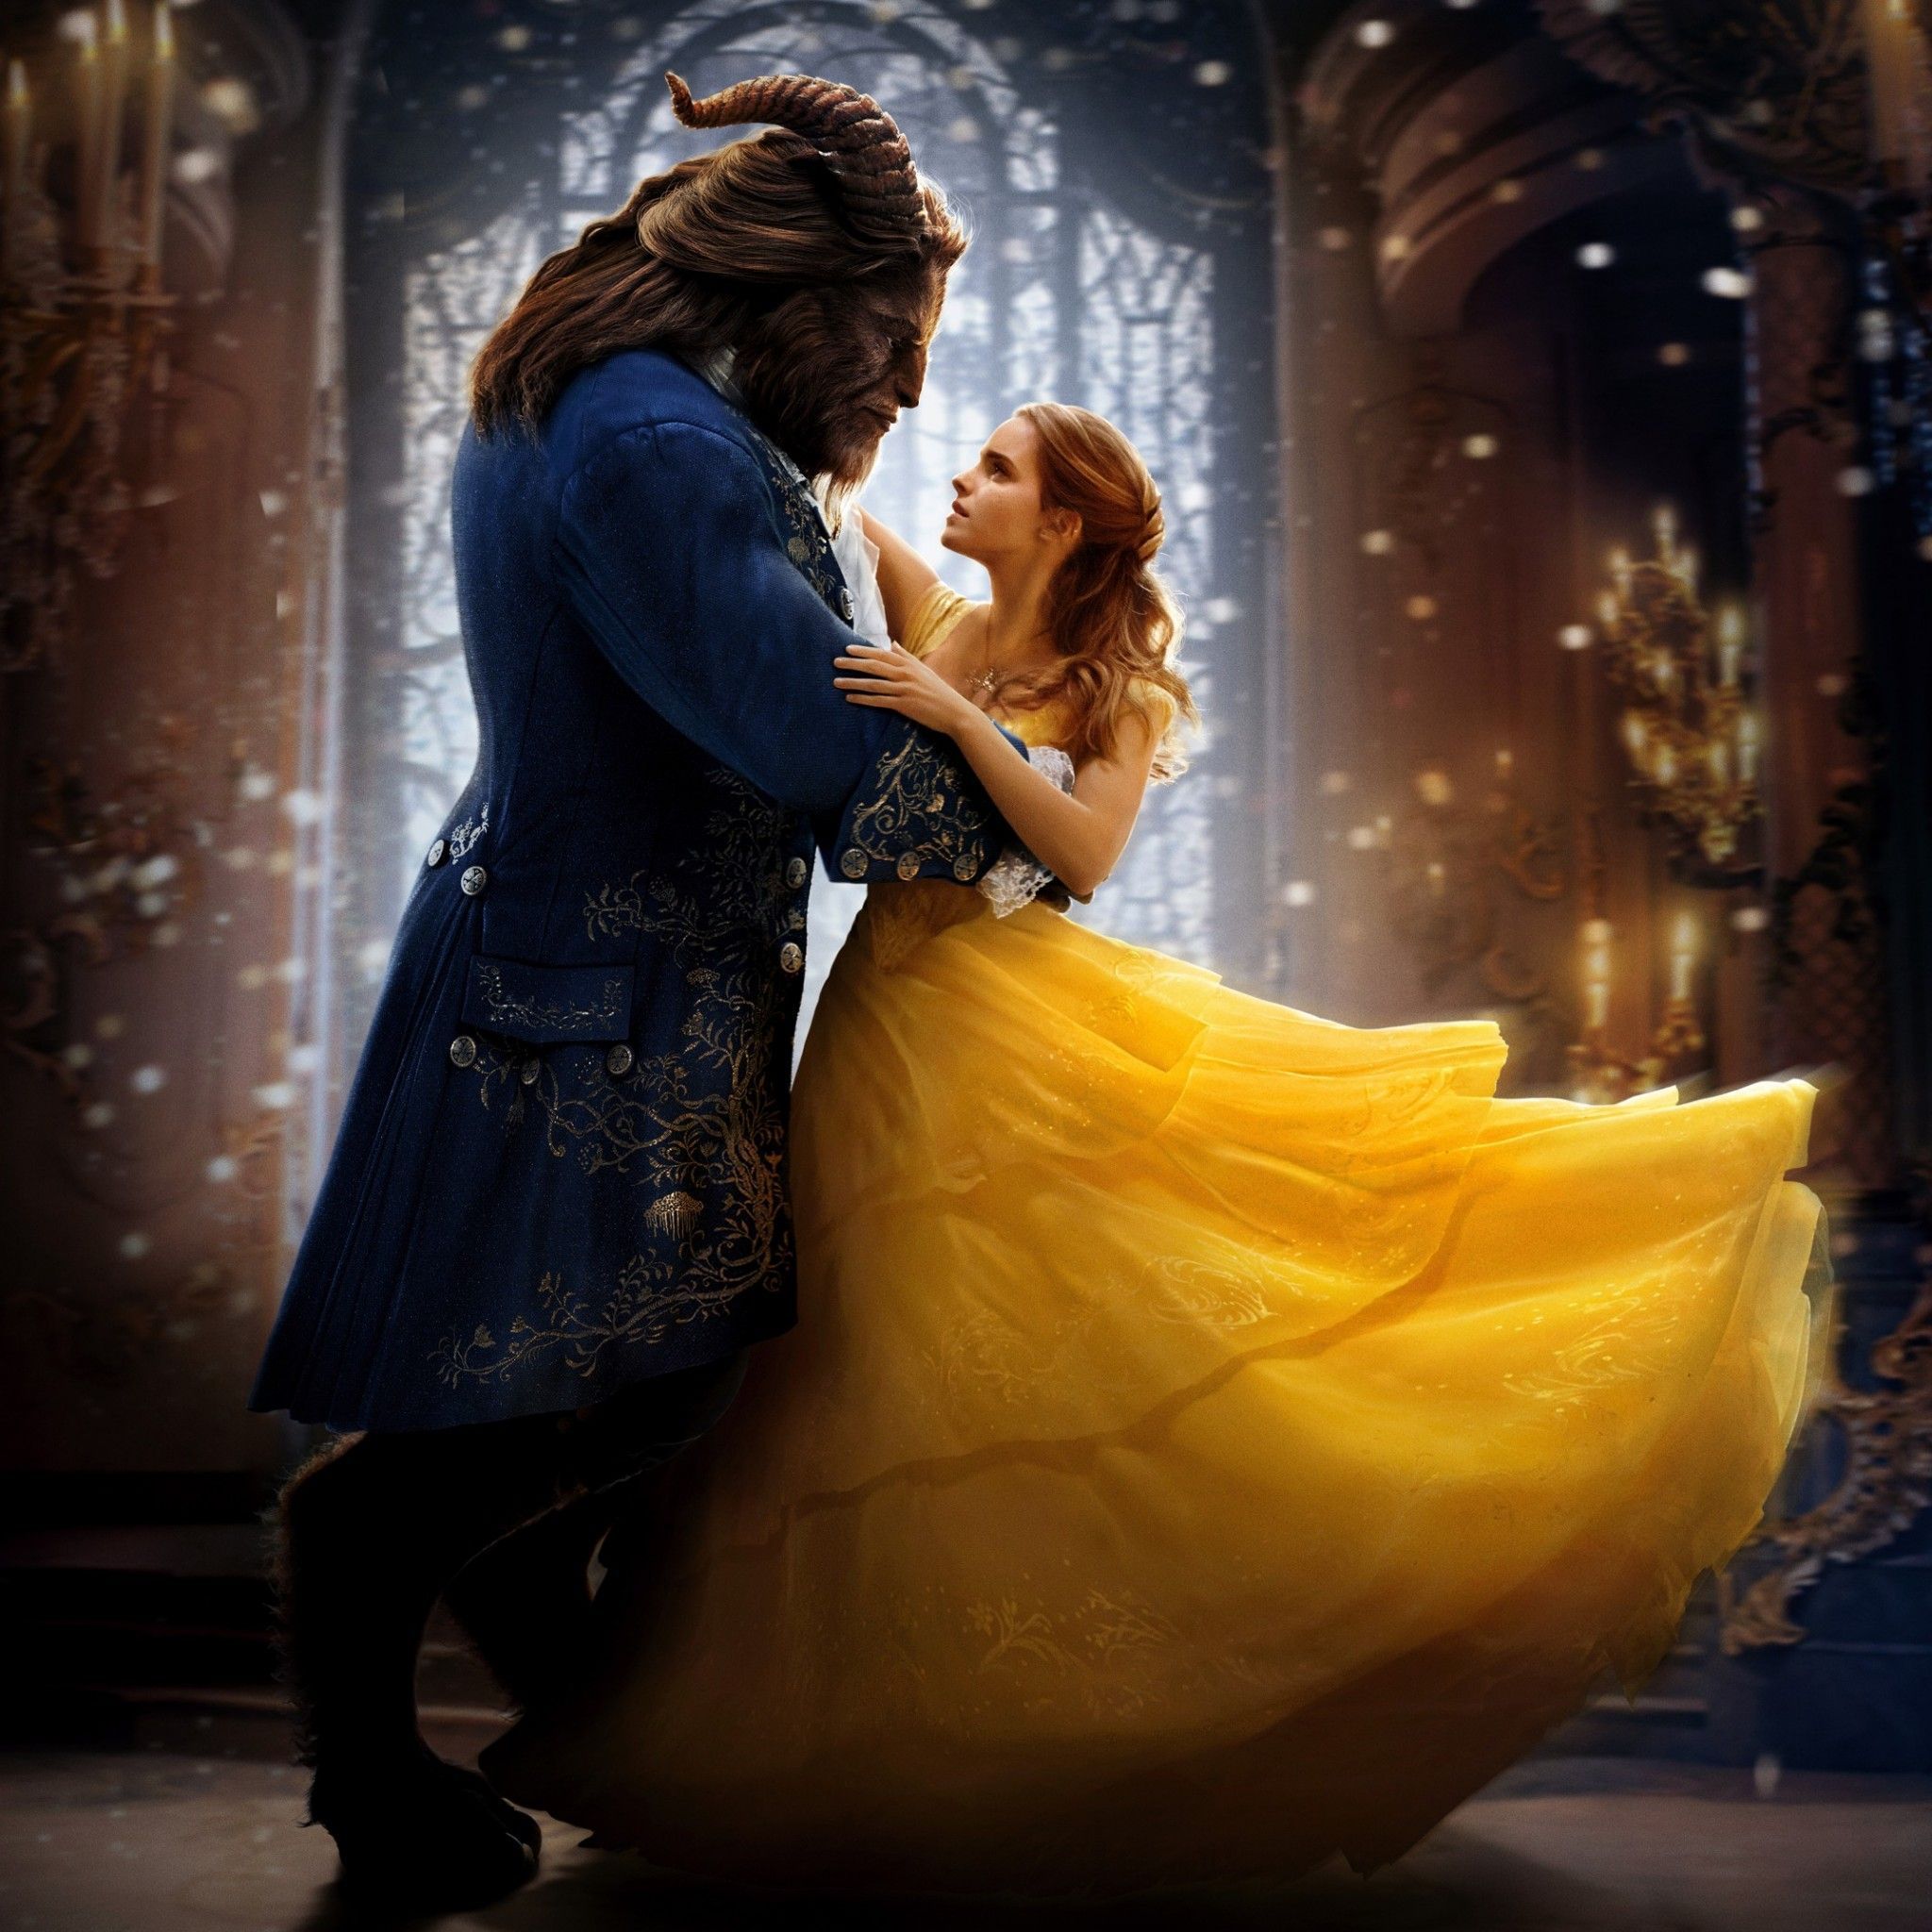 Emma Watson and Dan Stevens in a scene from the 2017 live-action Beauty and the Beast movie. - Belle